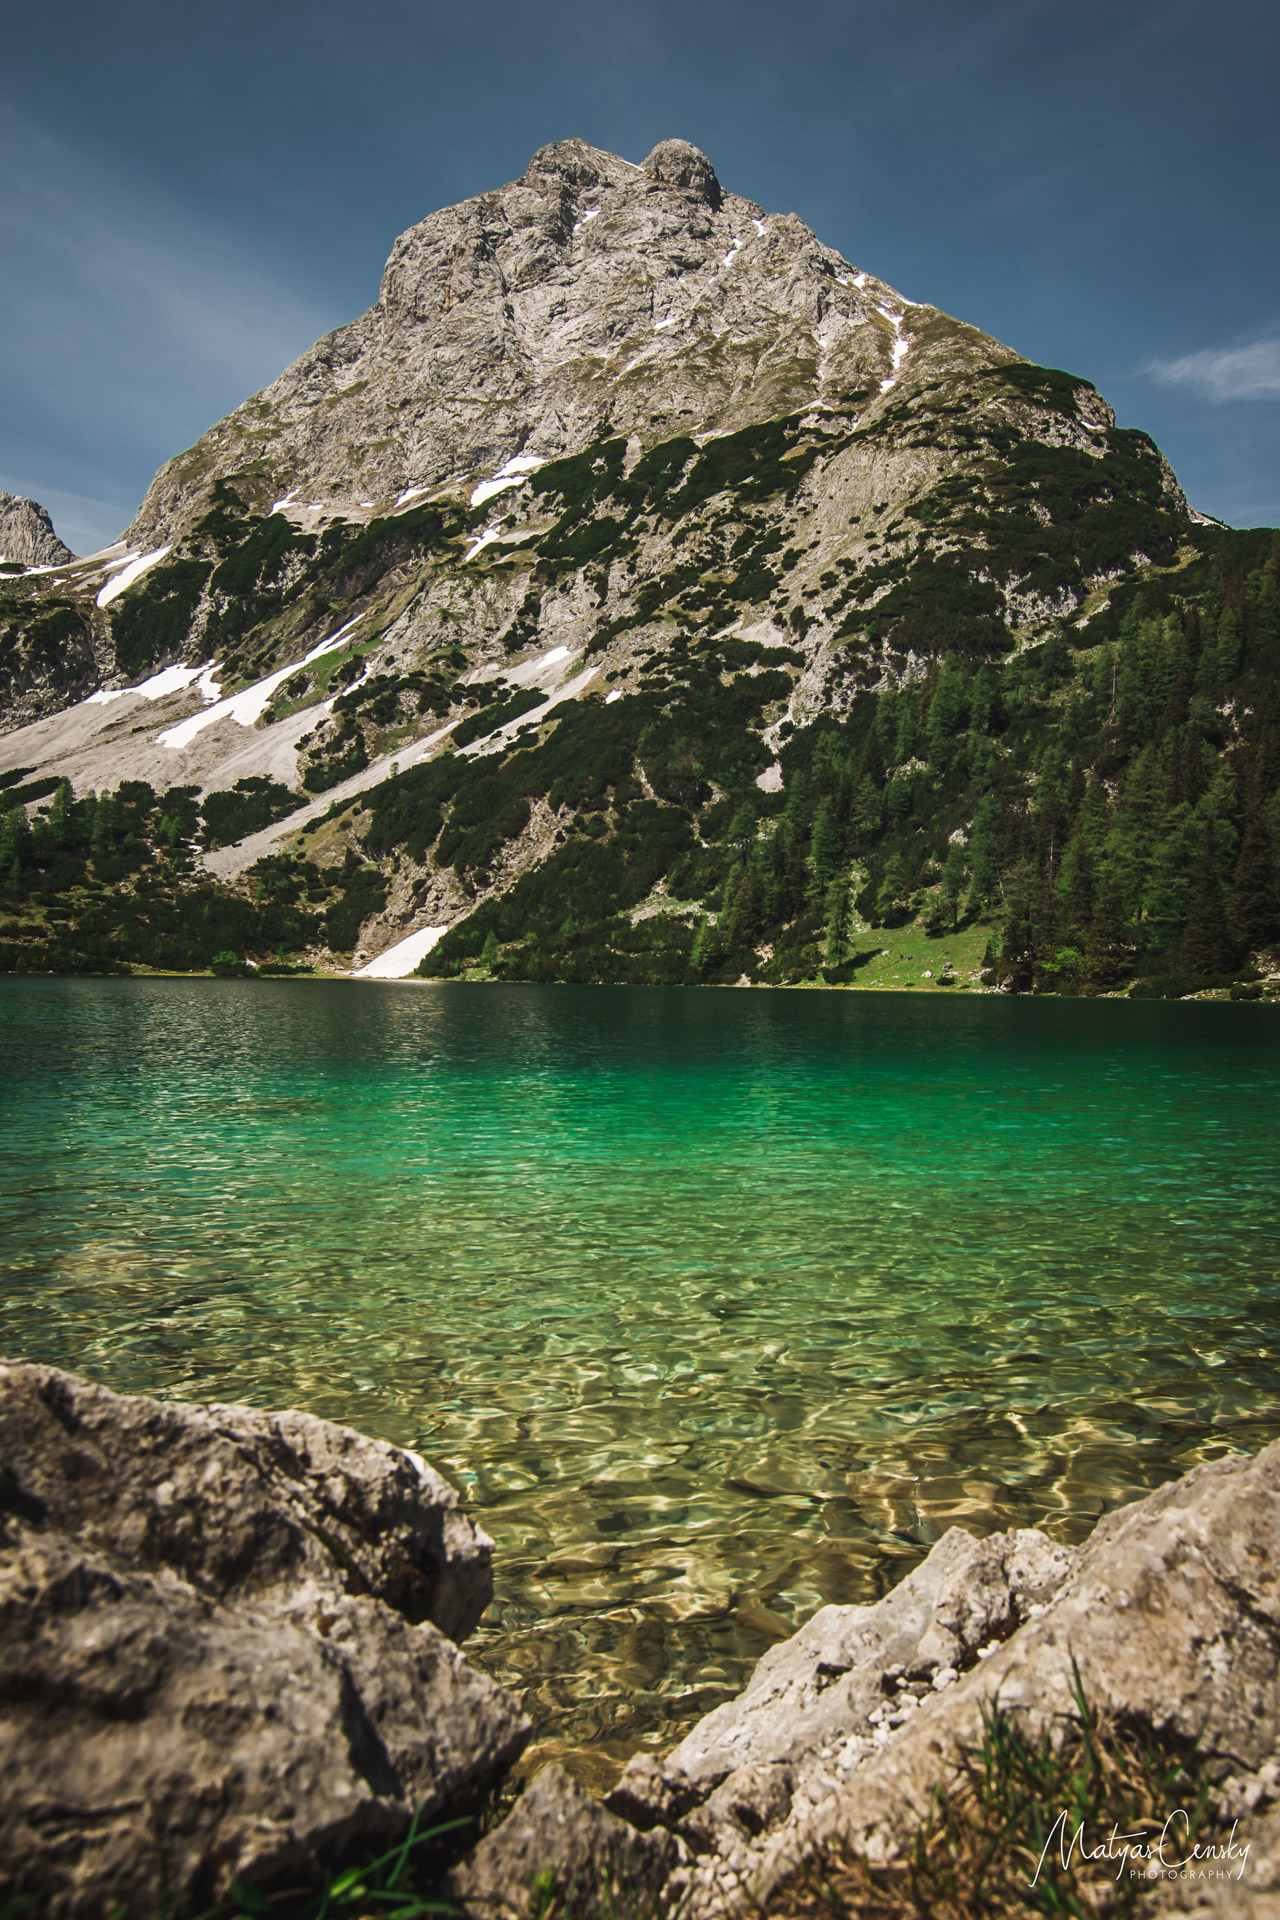 Photo of mountain lake Seebensee, with Ehrwalder Sonnenspitze mountain in the background.